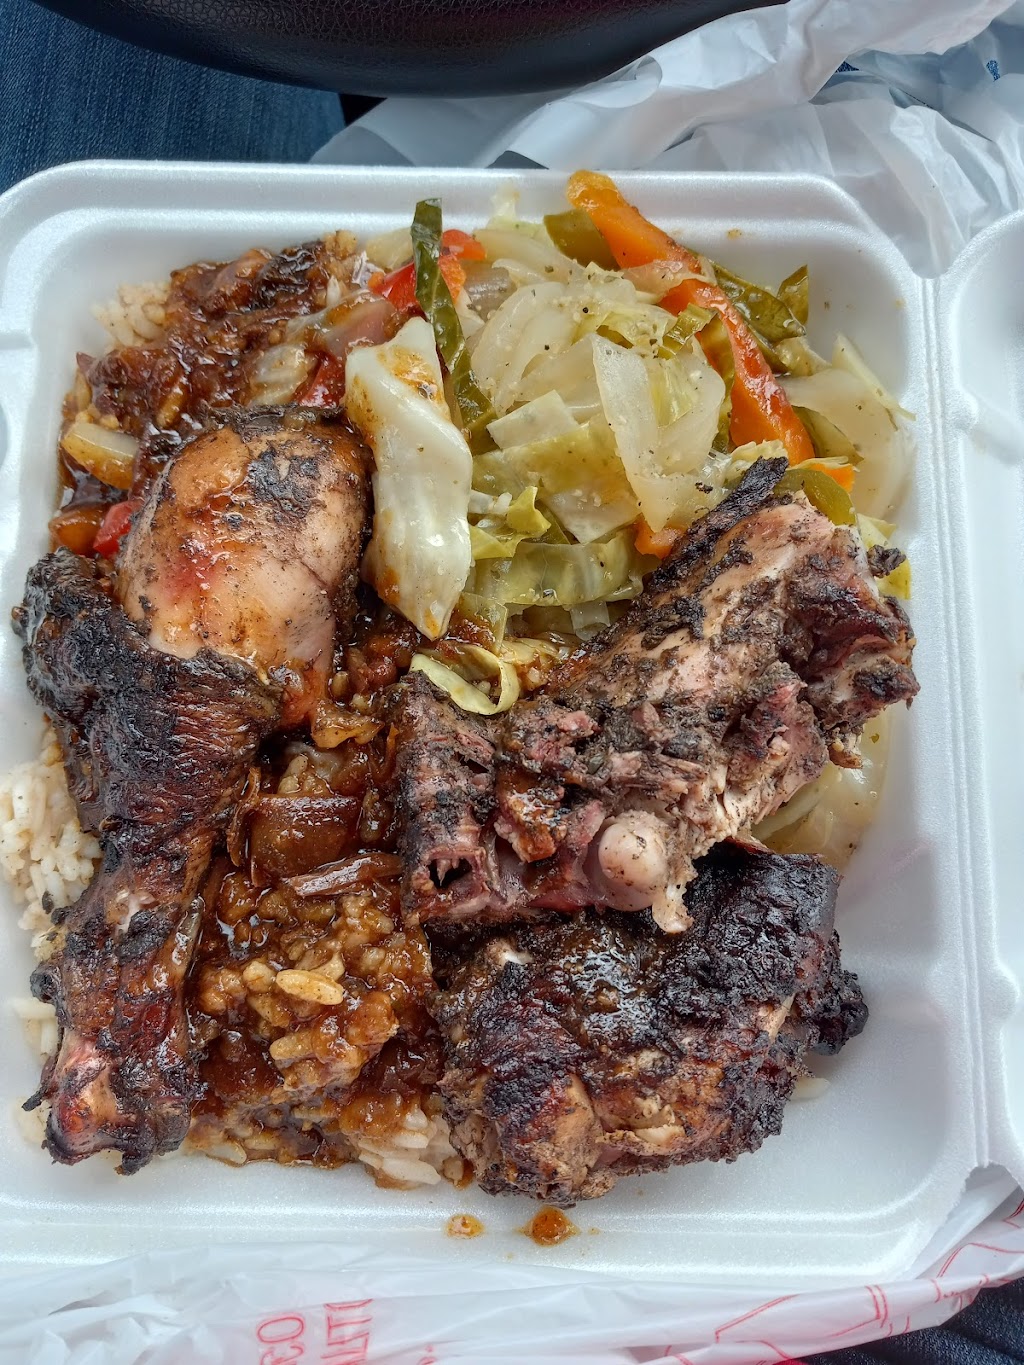 ISLAND VIBES CARIBBEAN KITCHEN AND CATERING | 1955 HWY 138 NE, Suite 1000, Conyers, GA 30013, USA | Phone: (770) 679-0793